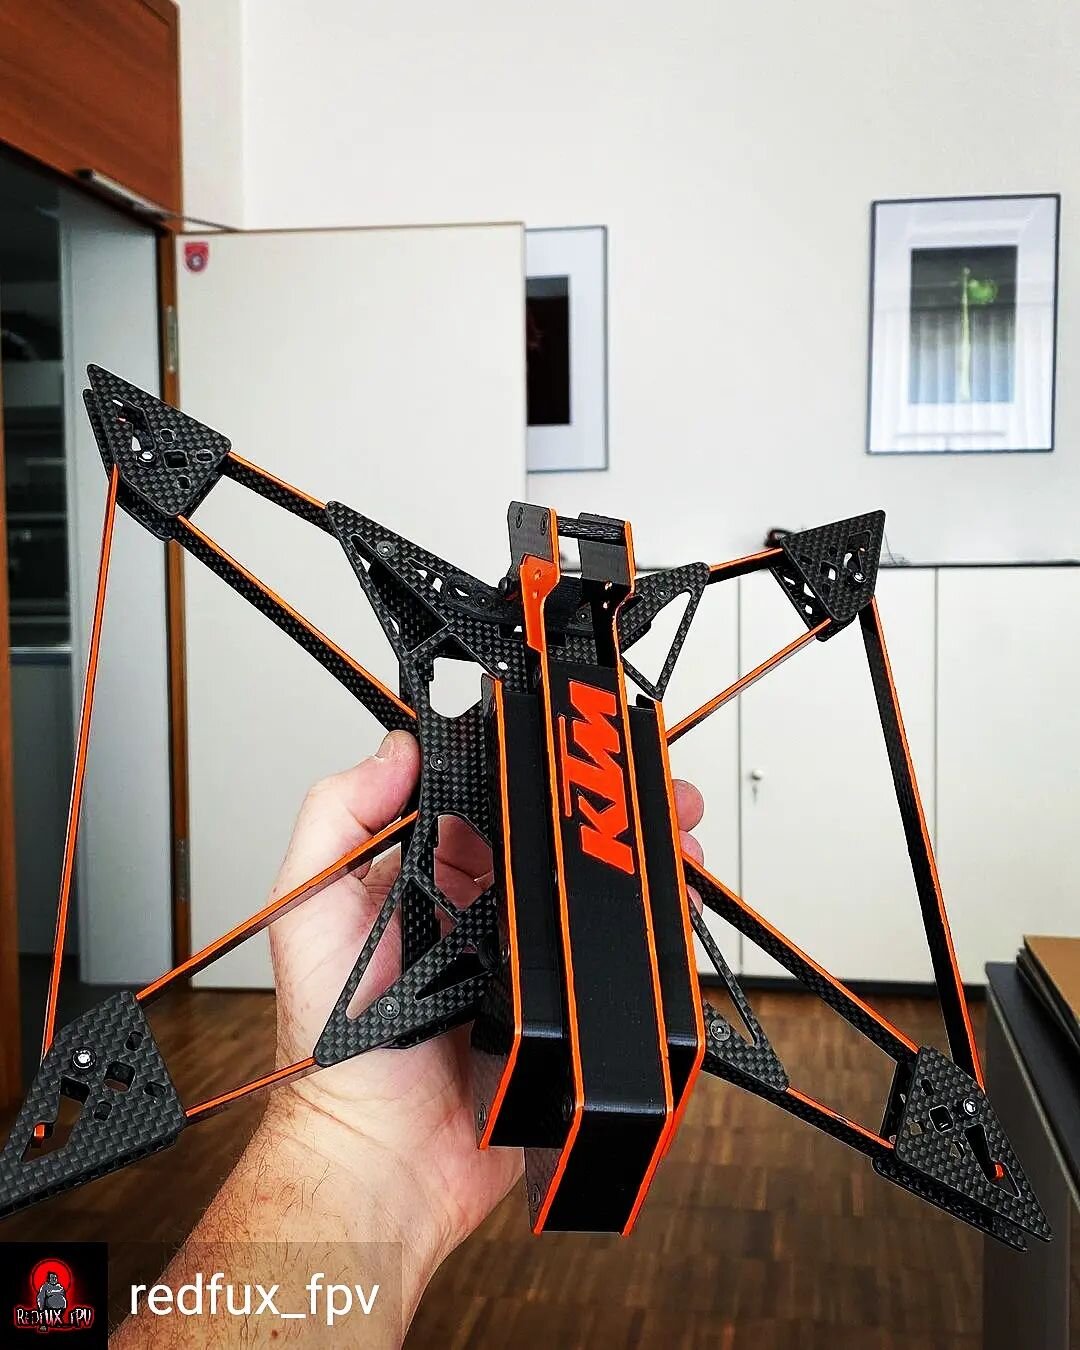 Meanwhile somewhere in Austria...😍🔥🤗

Great paint job by @redfux_fpv. Waiting for full assembly and share of his flight experience.

Picture credits to @redfux_fpv